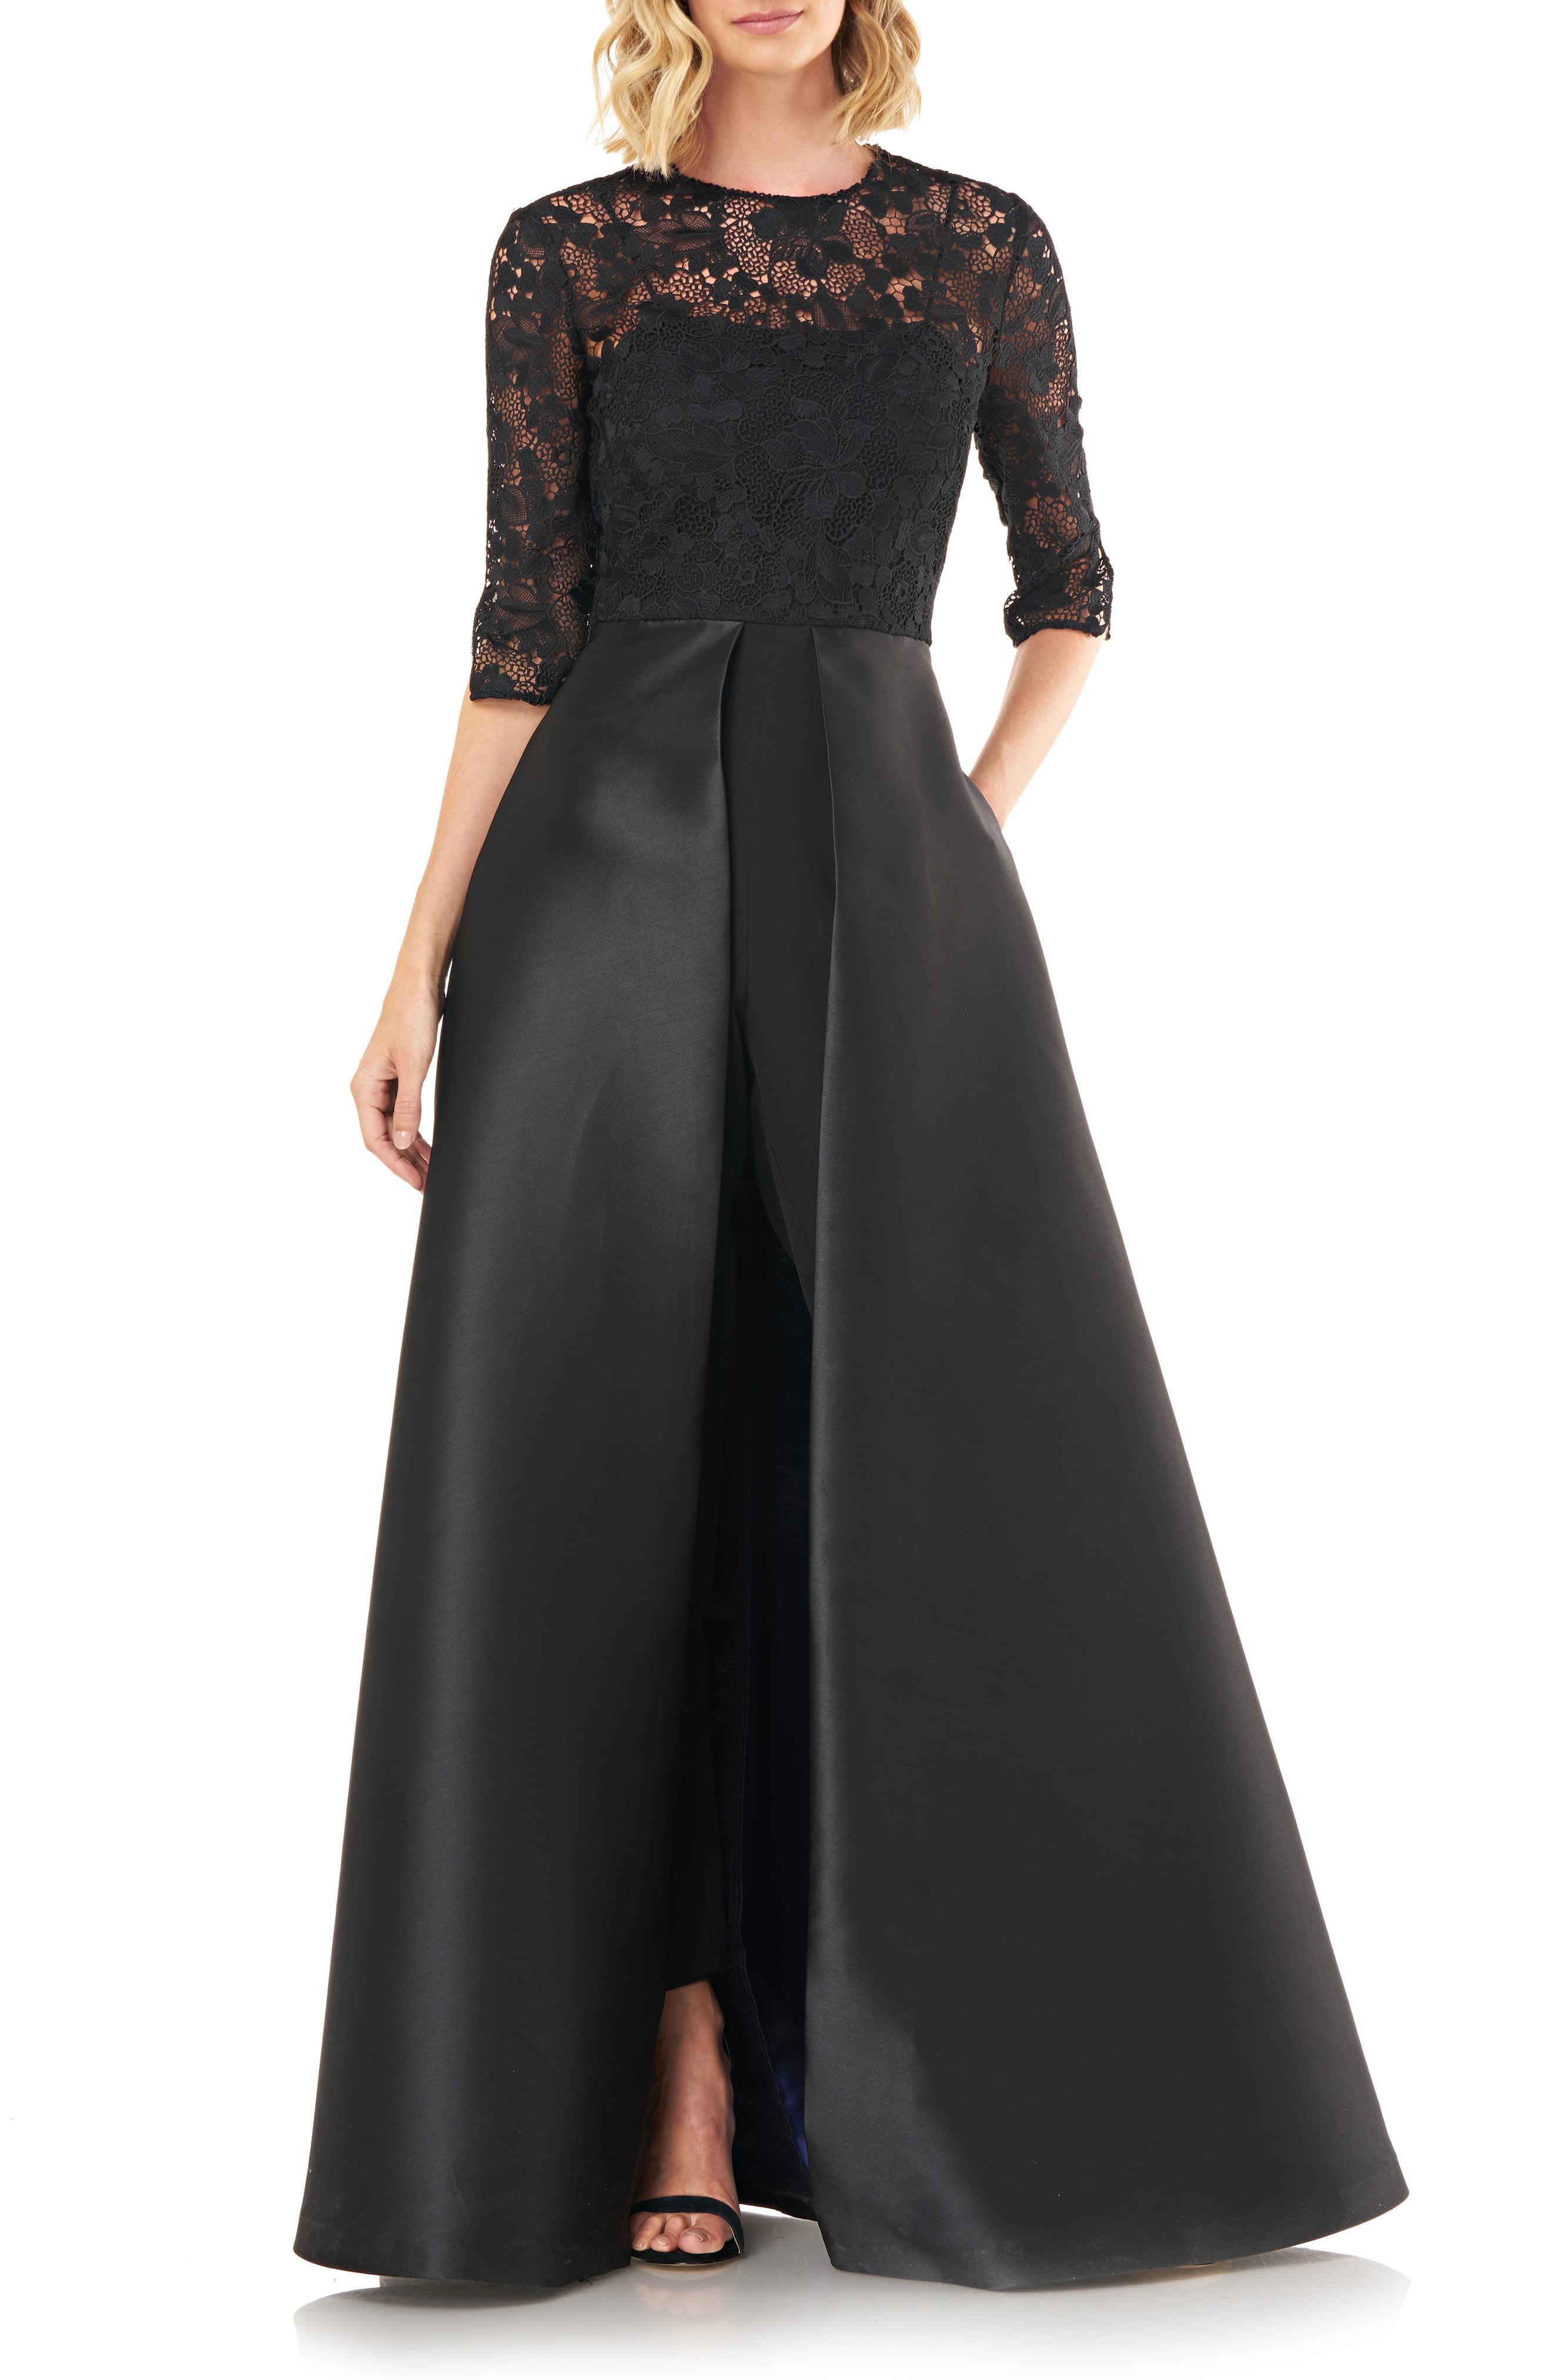 Kay Unger Porsha Lace Maxi Romper in Black - Lyst